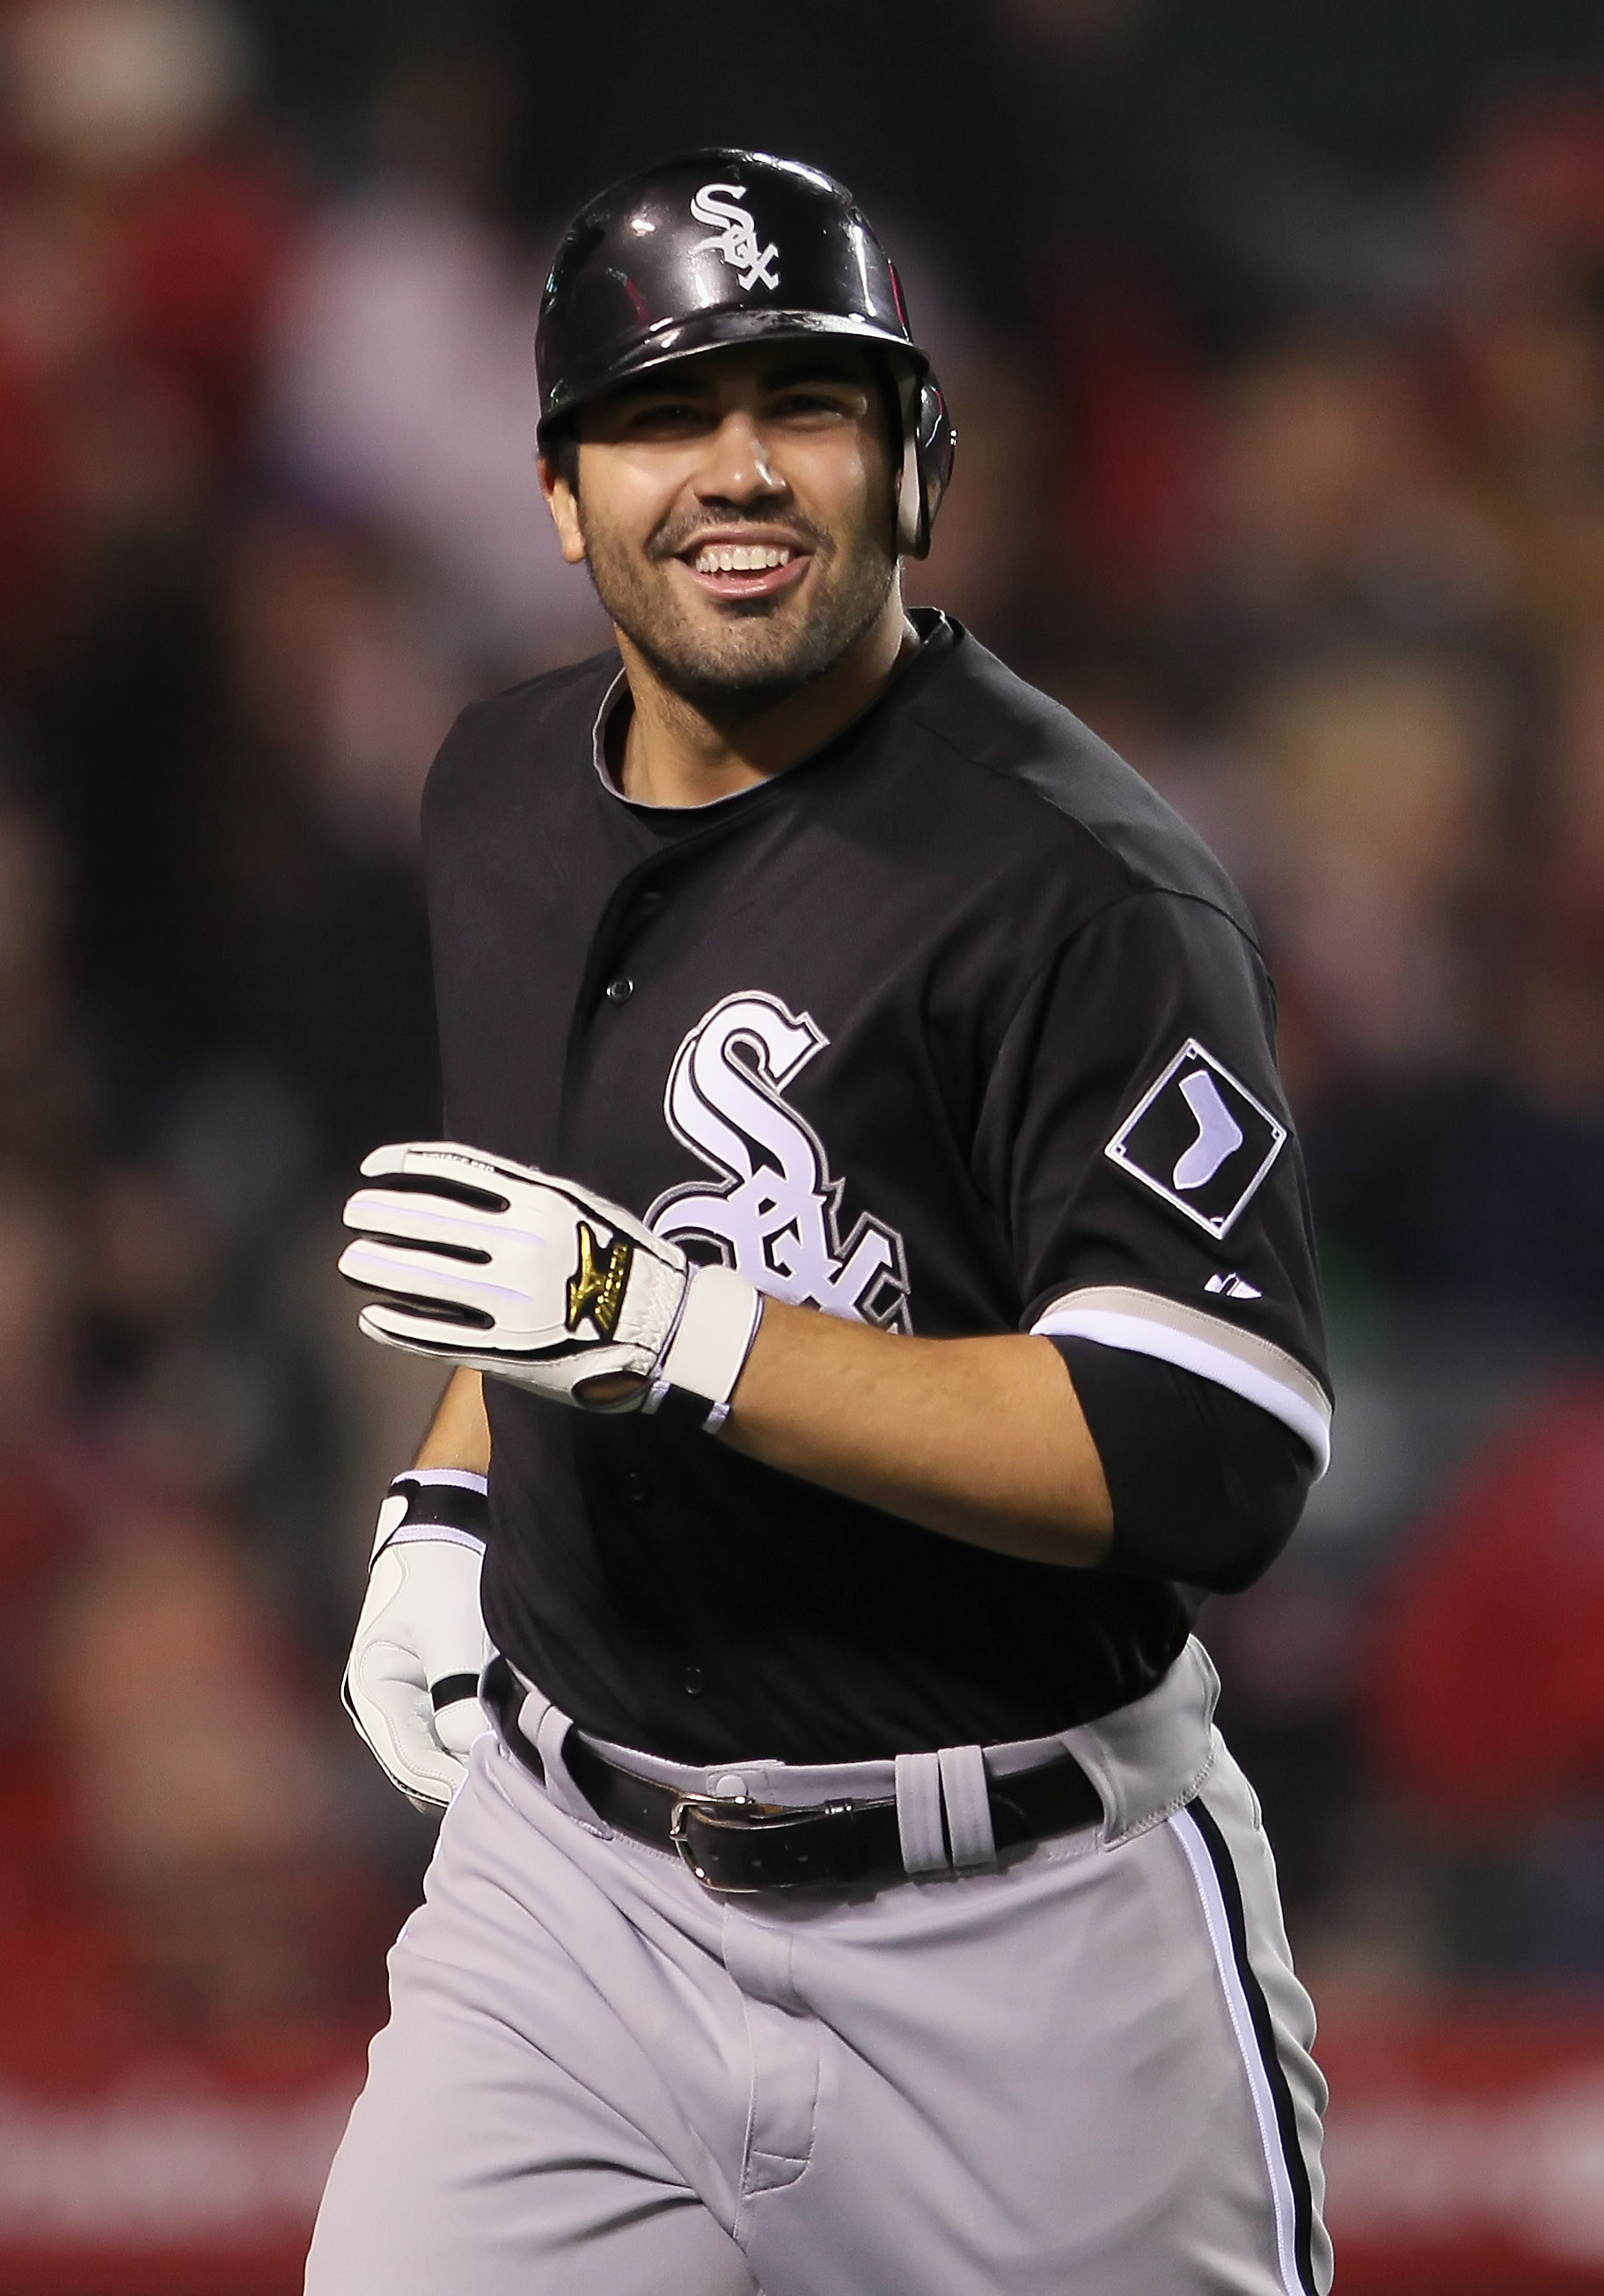 The White Sox have had reason to smile recently.